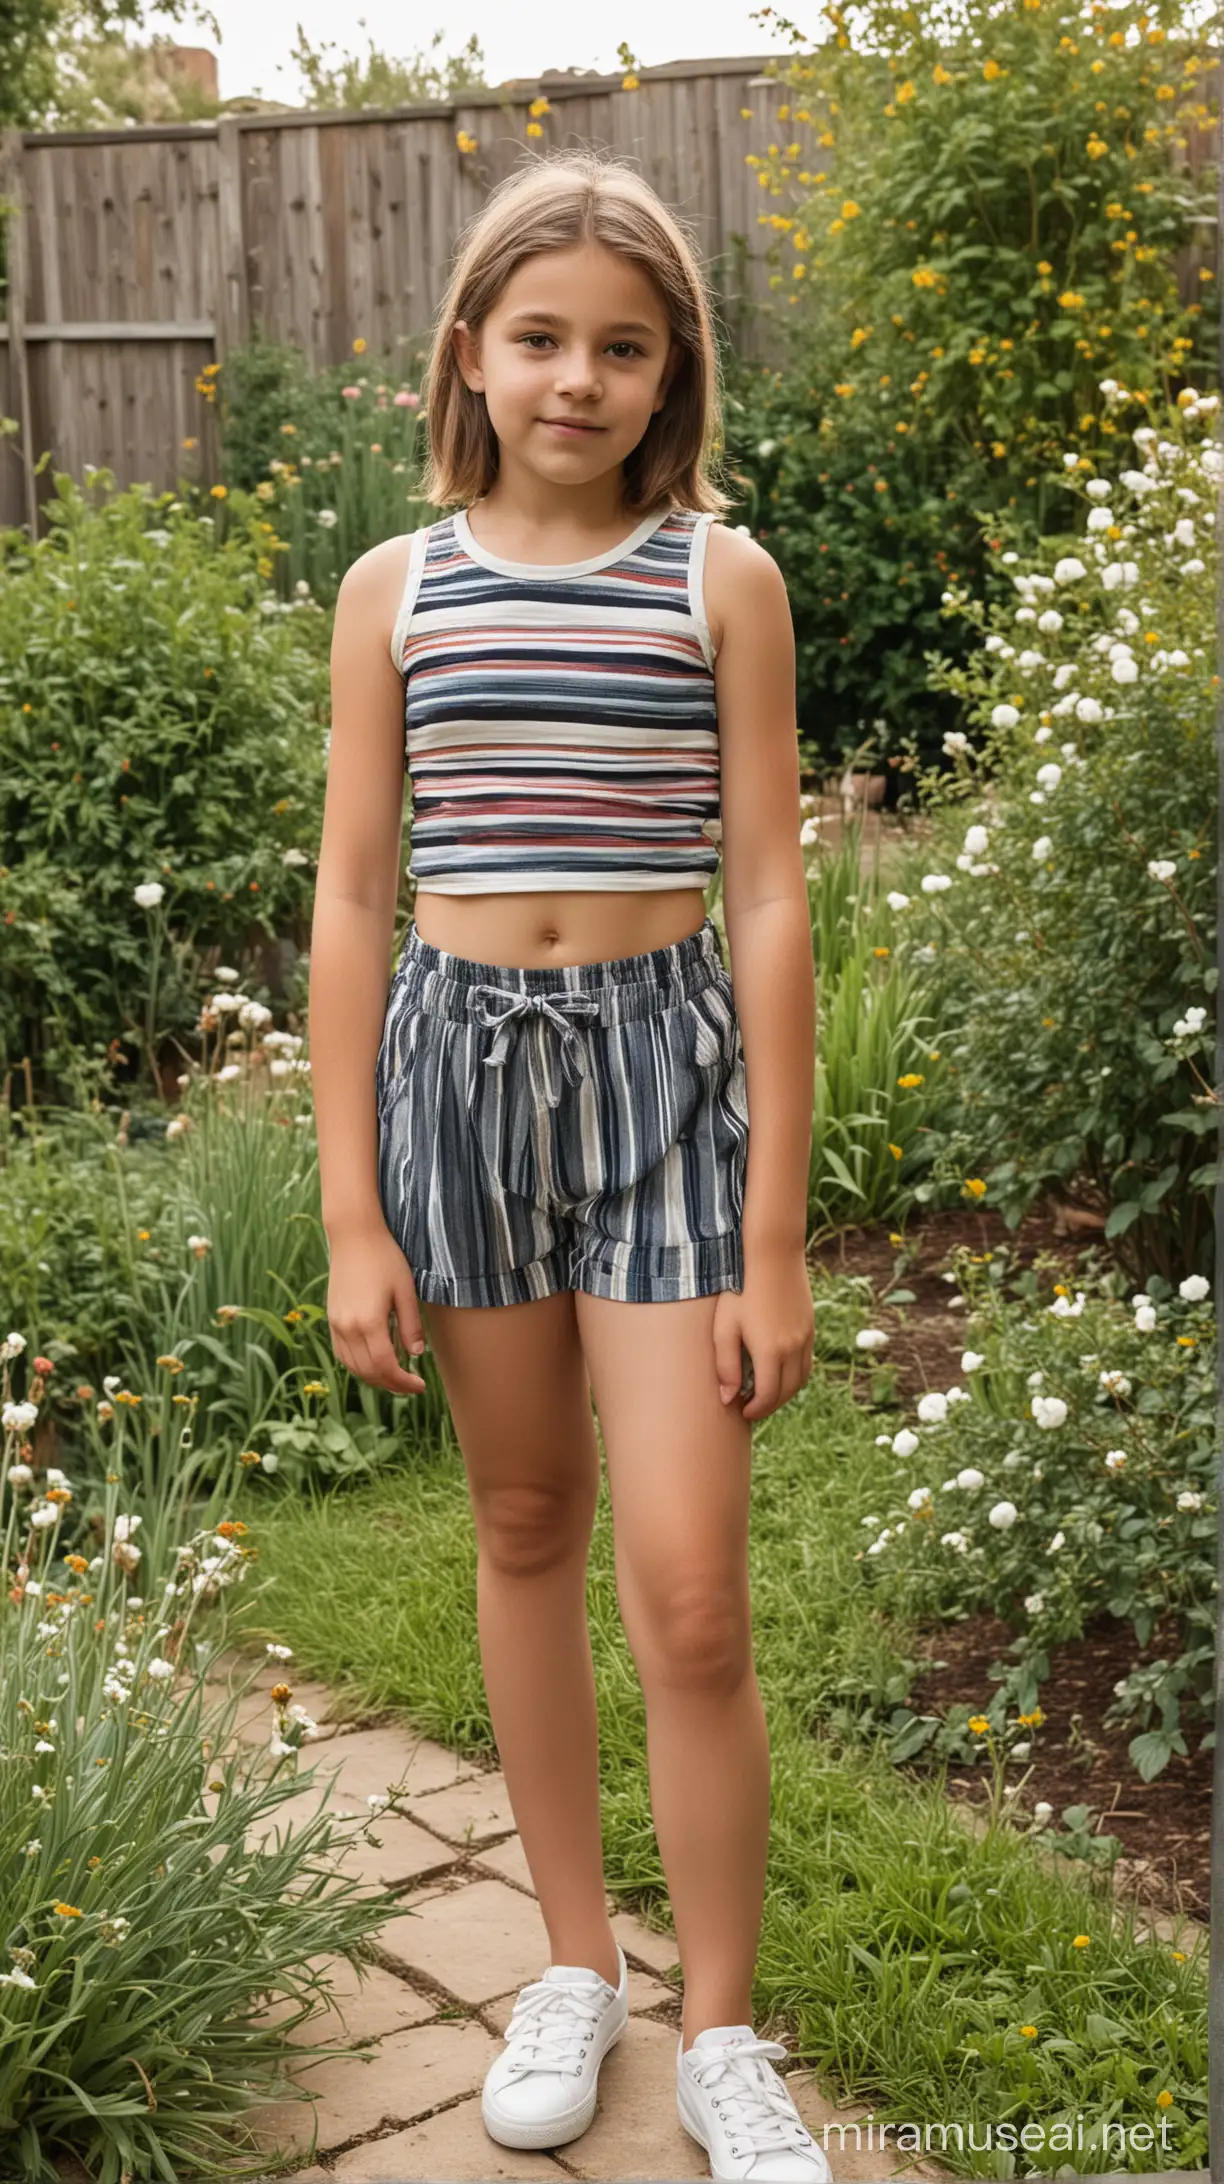 12 years old girl, wearing sleeveless crop top  stripes with cotton short shorts, in garden